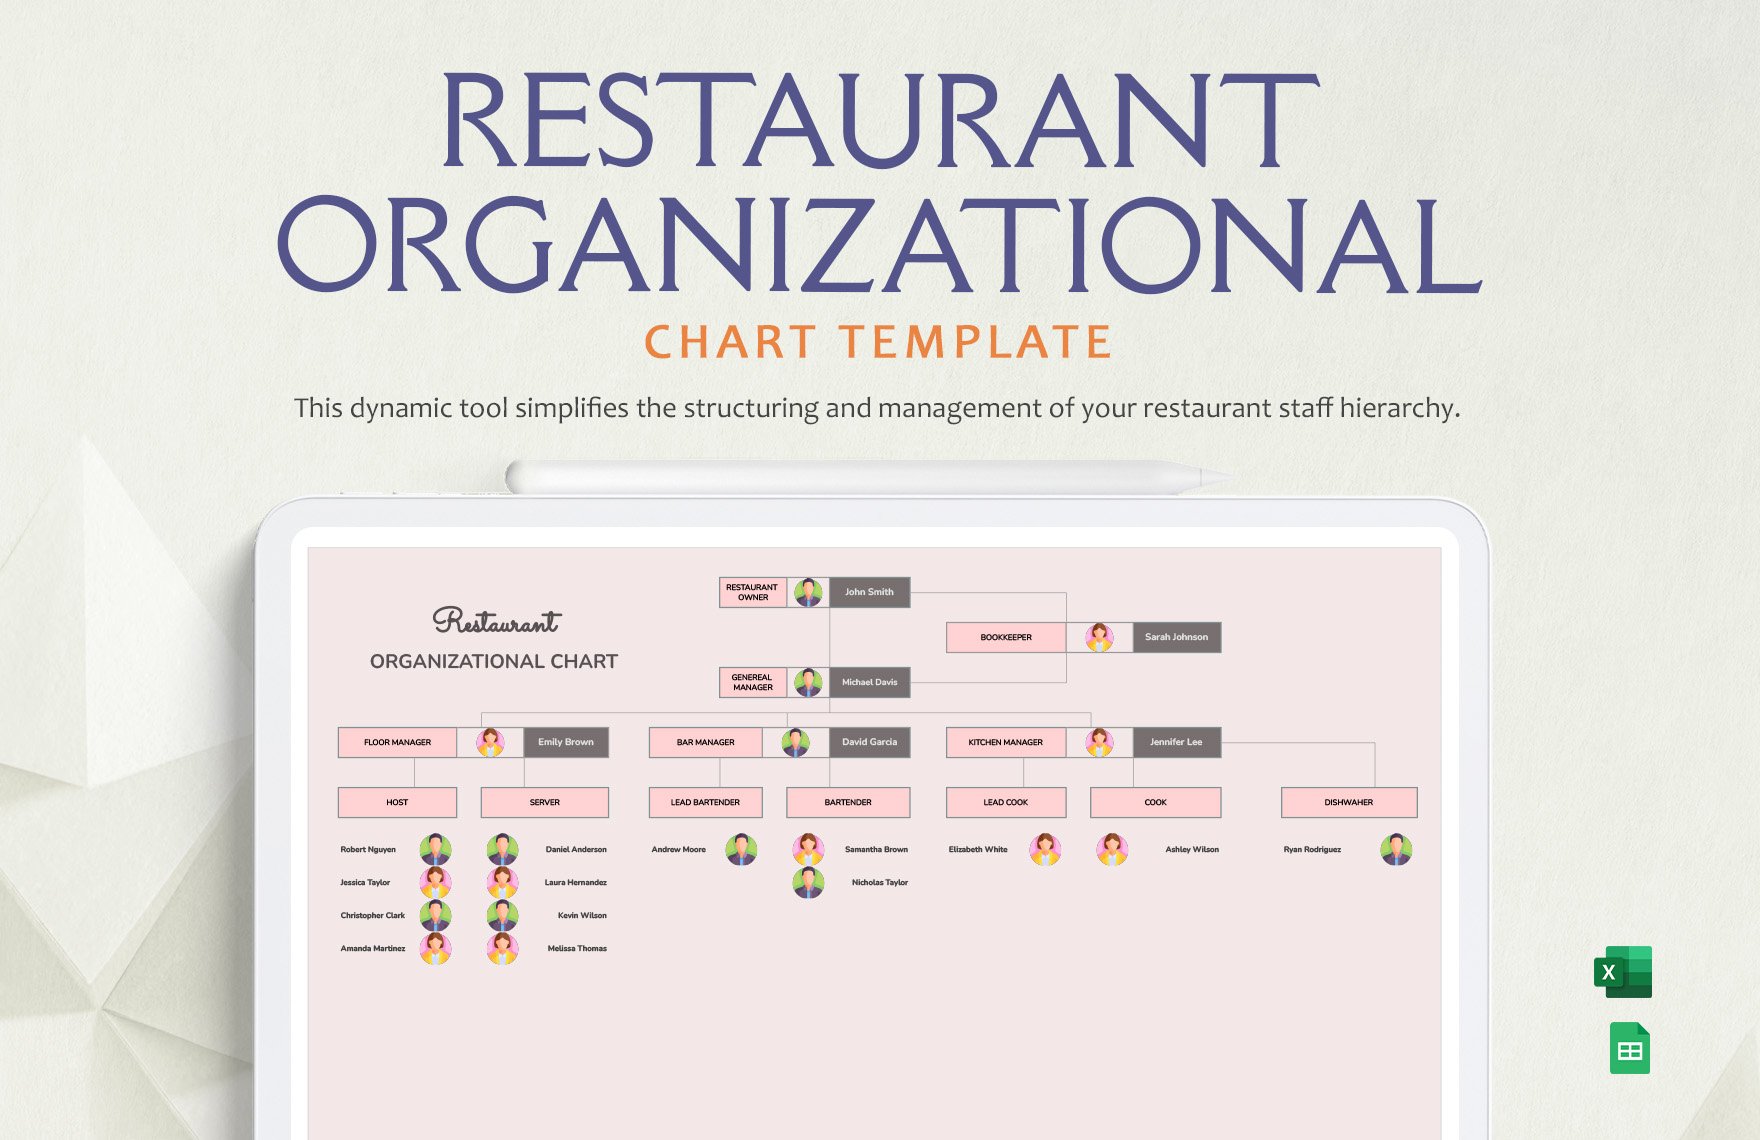 Restaurant Organizational Chart Template in Excel, Google Sheets